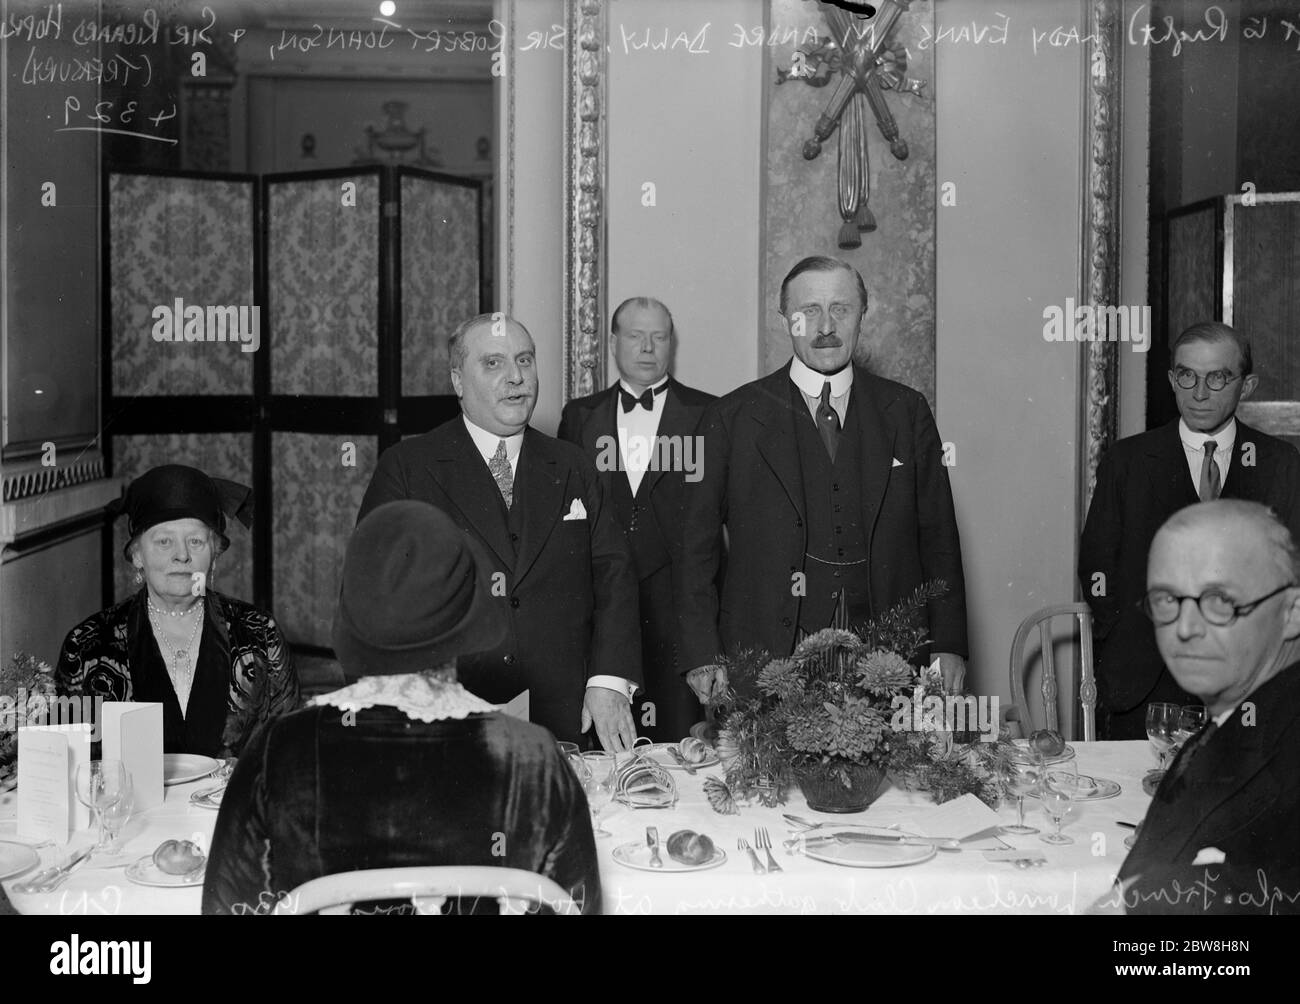 Honouring a money maker . Director of the French mint entertained in London  . At the Anglo French Luncheon Club gathering , Hotel Victoria . Left to  right : Lady Evans ,